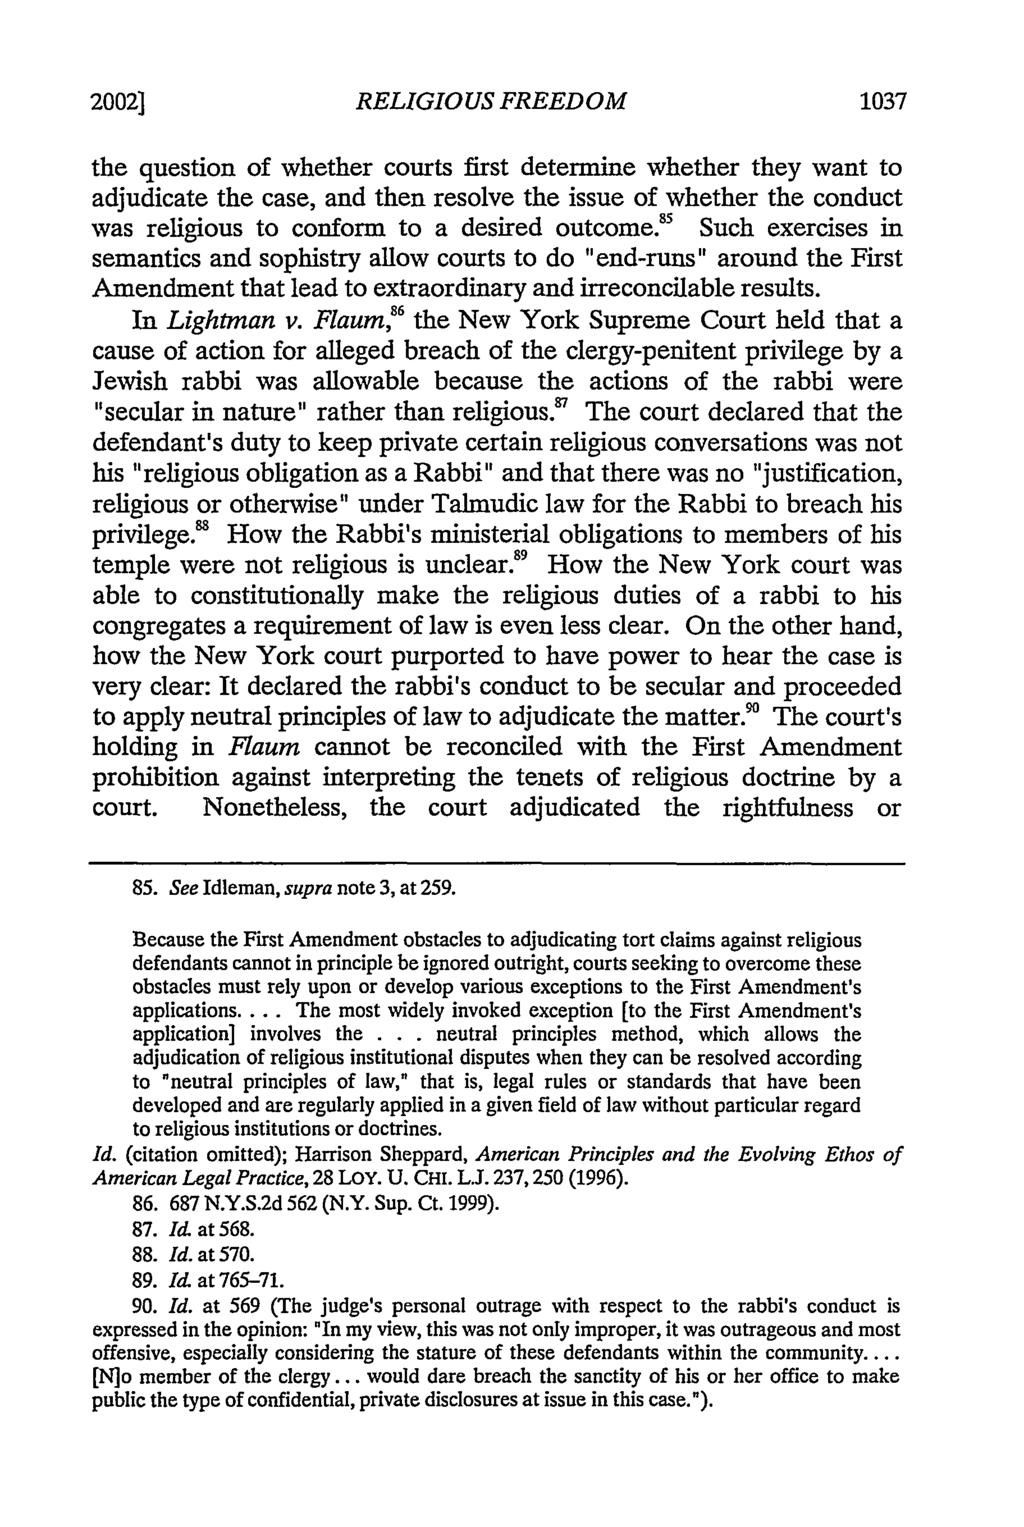 2002] RELIGIOUS FREEDOM 1037/ the question of whether courts first determine whether they want to adjudicate the case, and then resolve the issue of whether the conduct was religious to conform to a